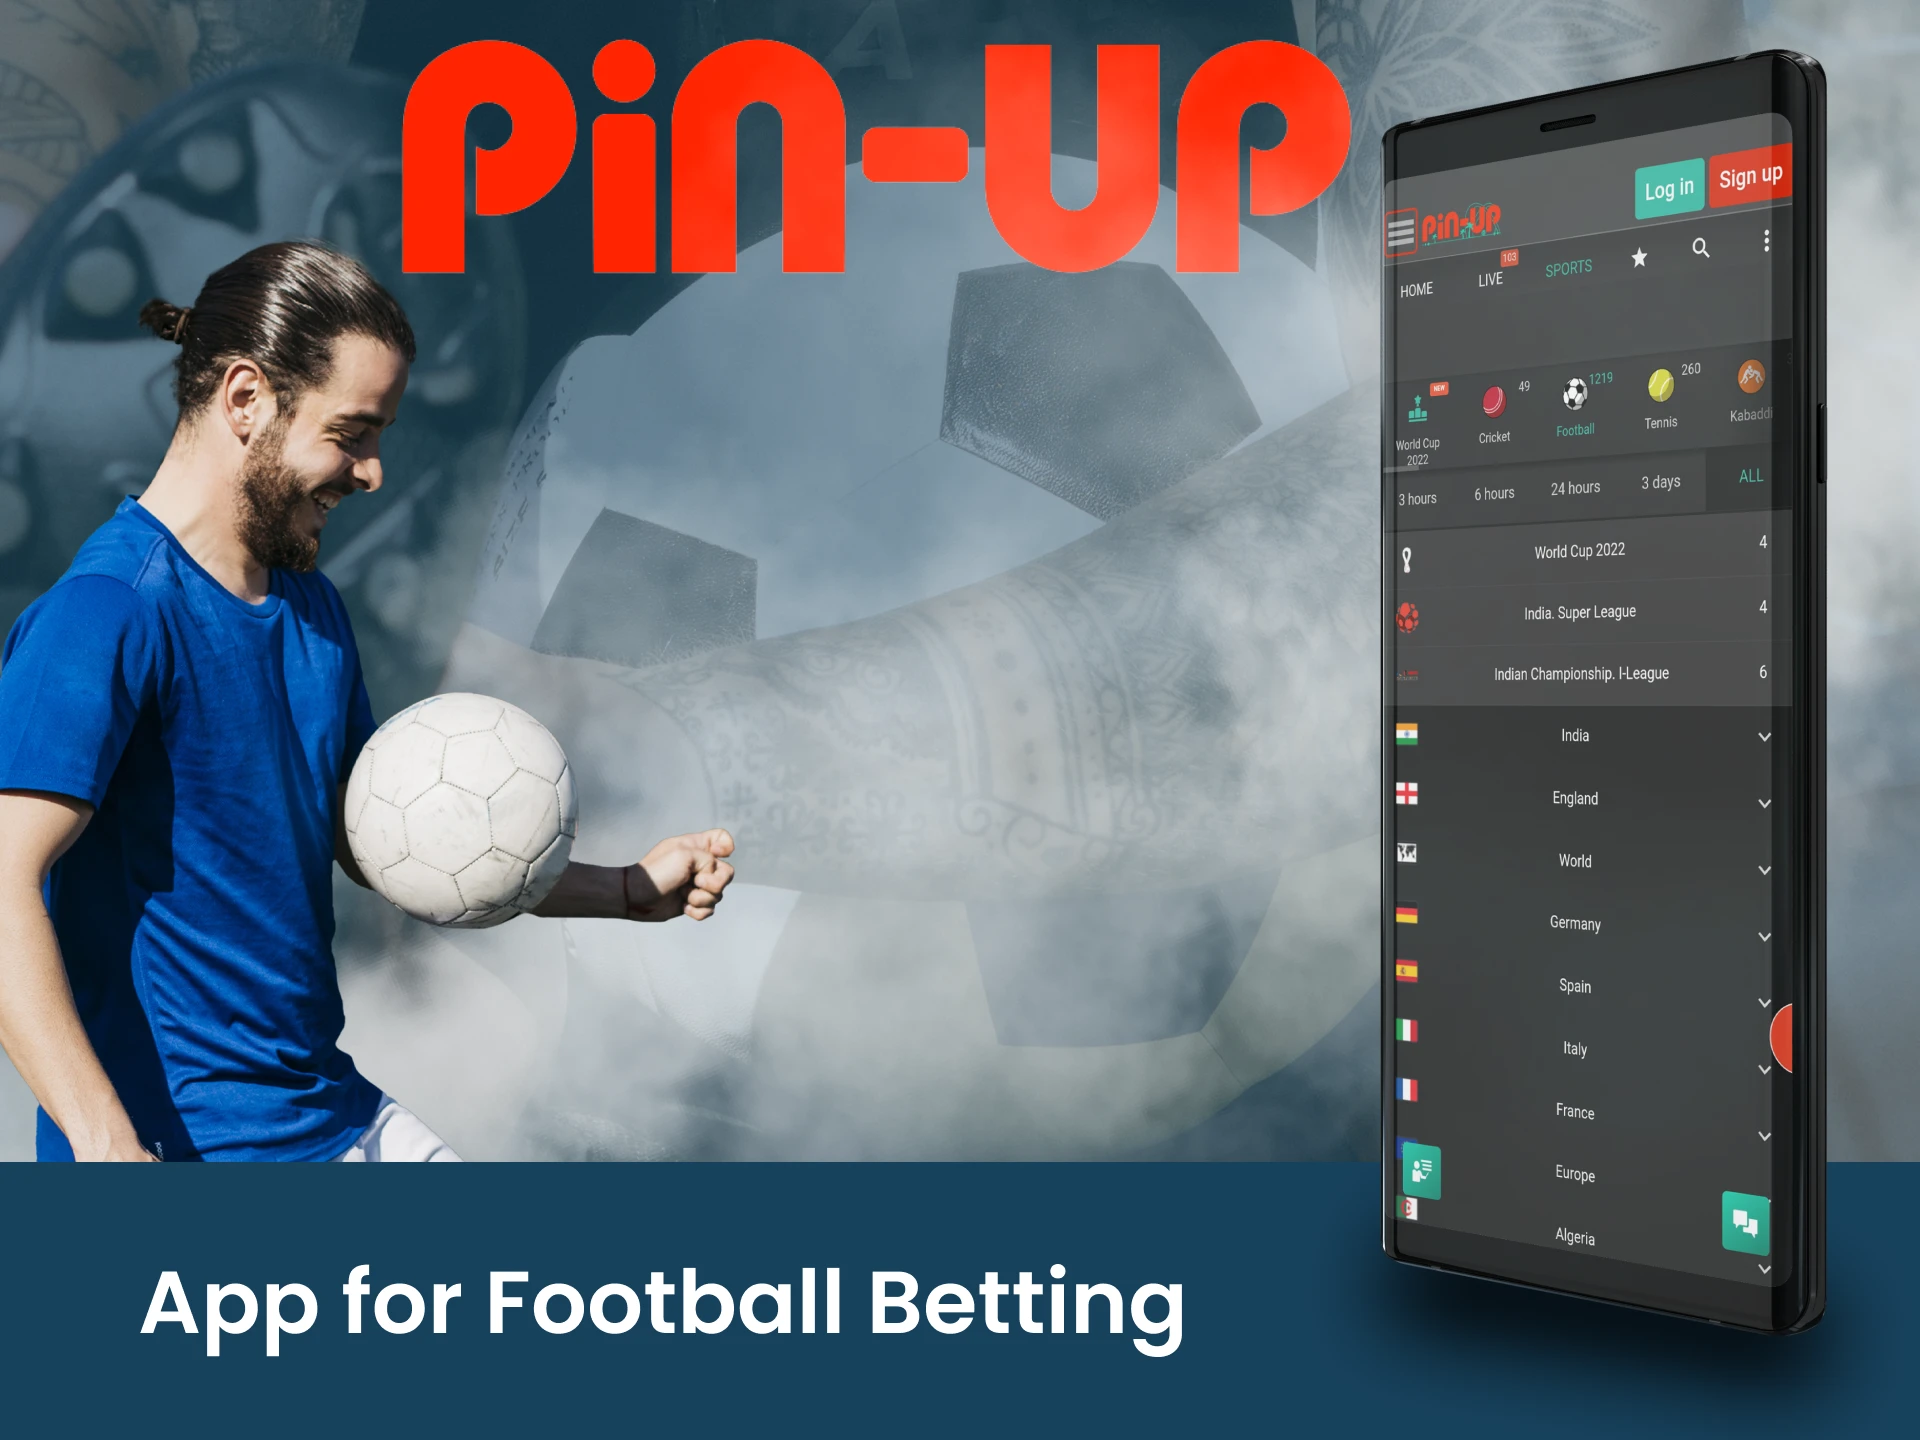 Download the Pin Up mobile app and start betting on football.